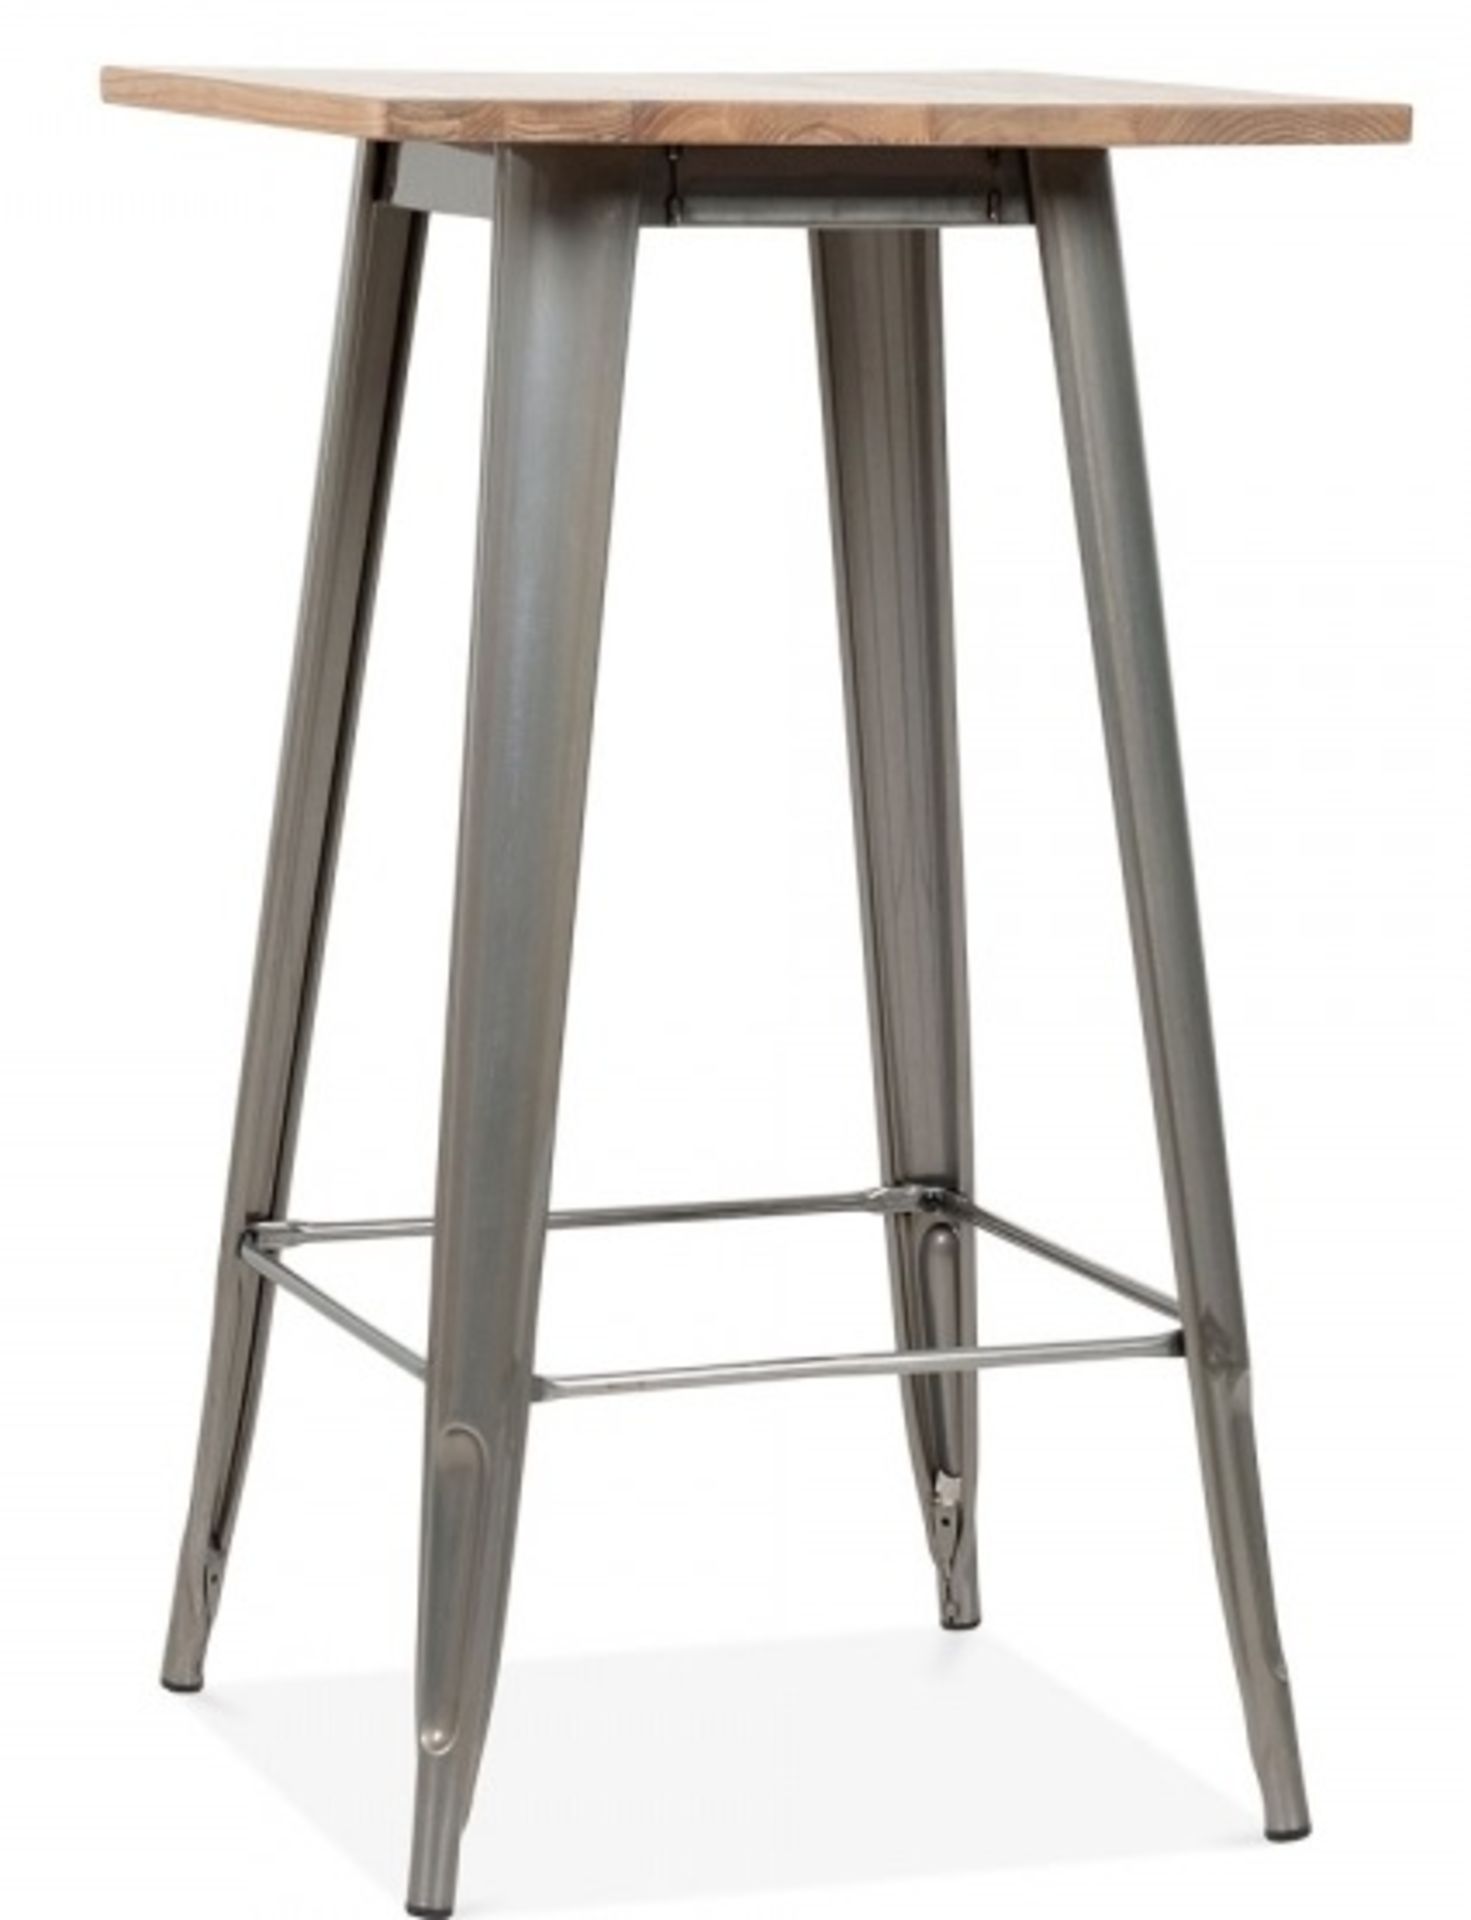 1 x Xavier Pauchard Inspired Industrial Metal Bar Table - Dimensions: 60x60xH103cm - Brand New - Image 2 of 5